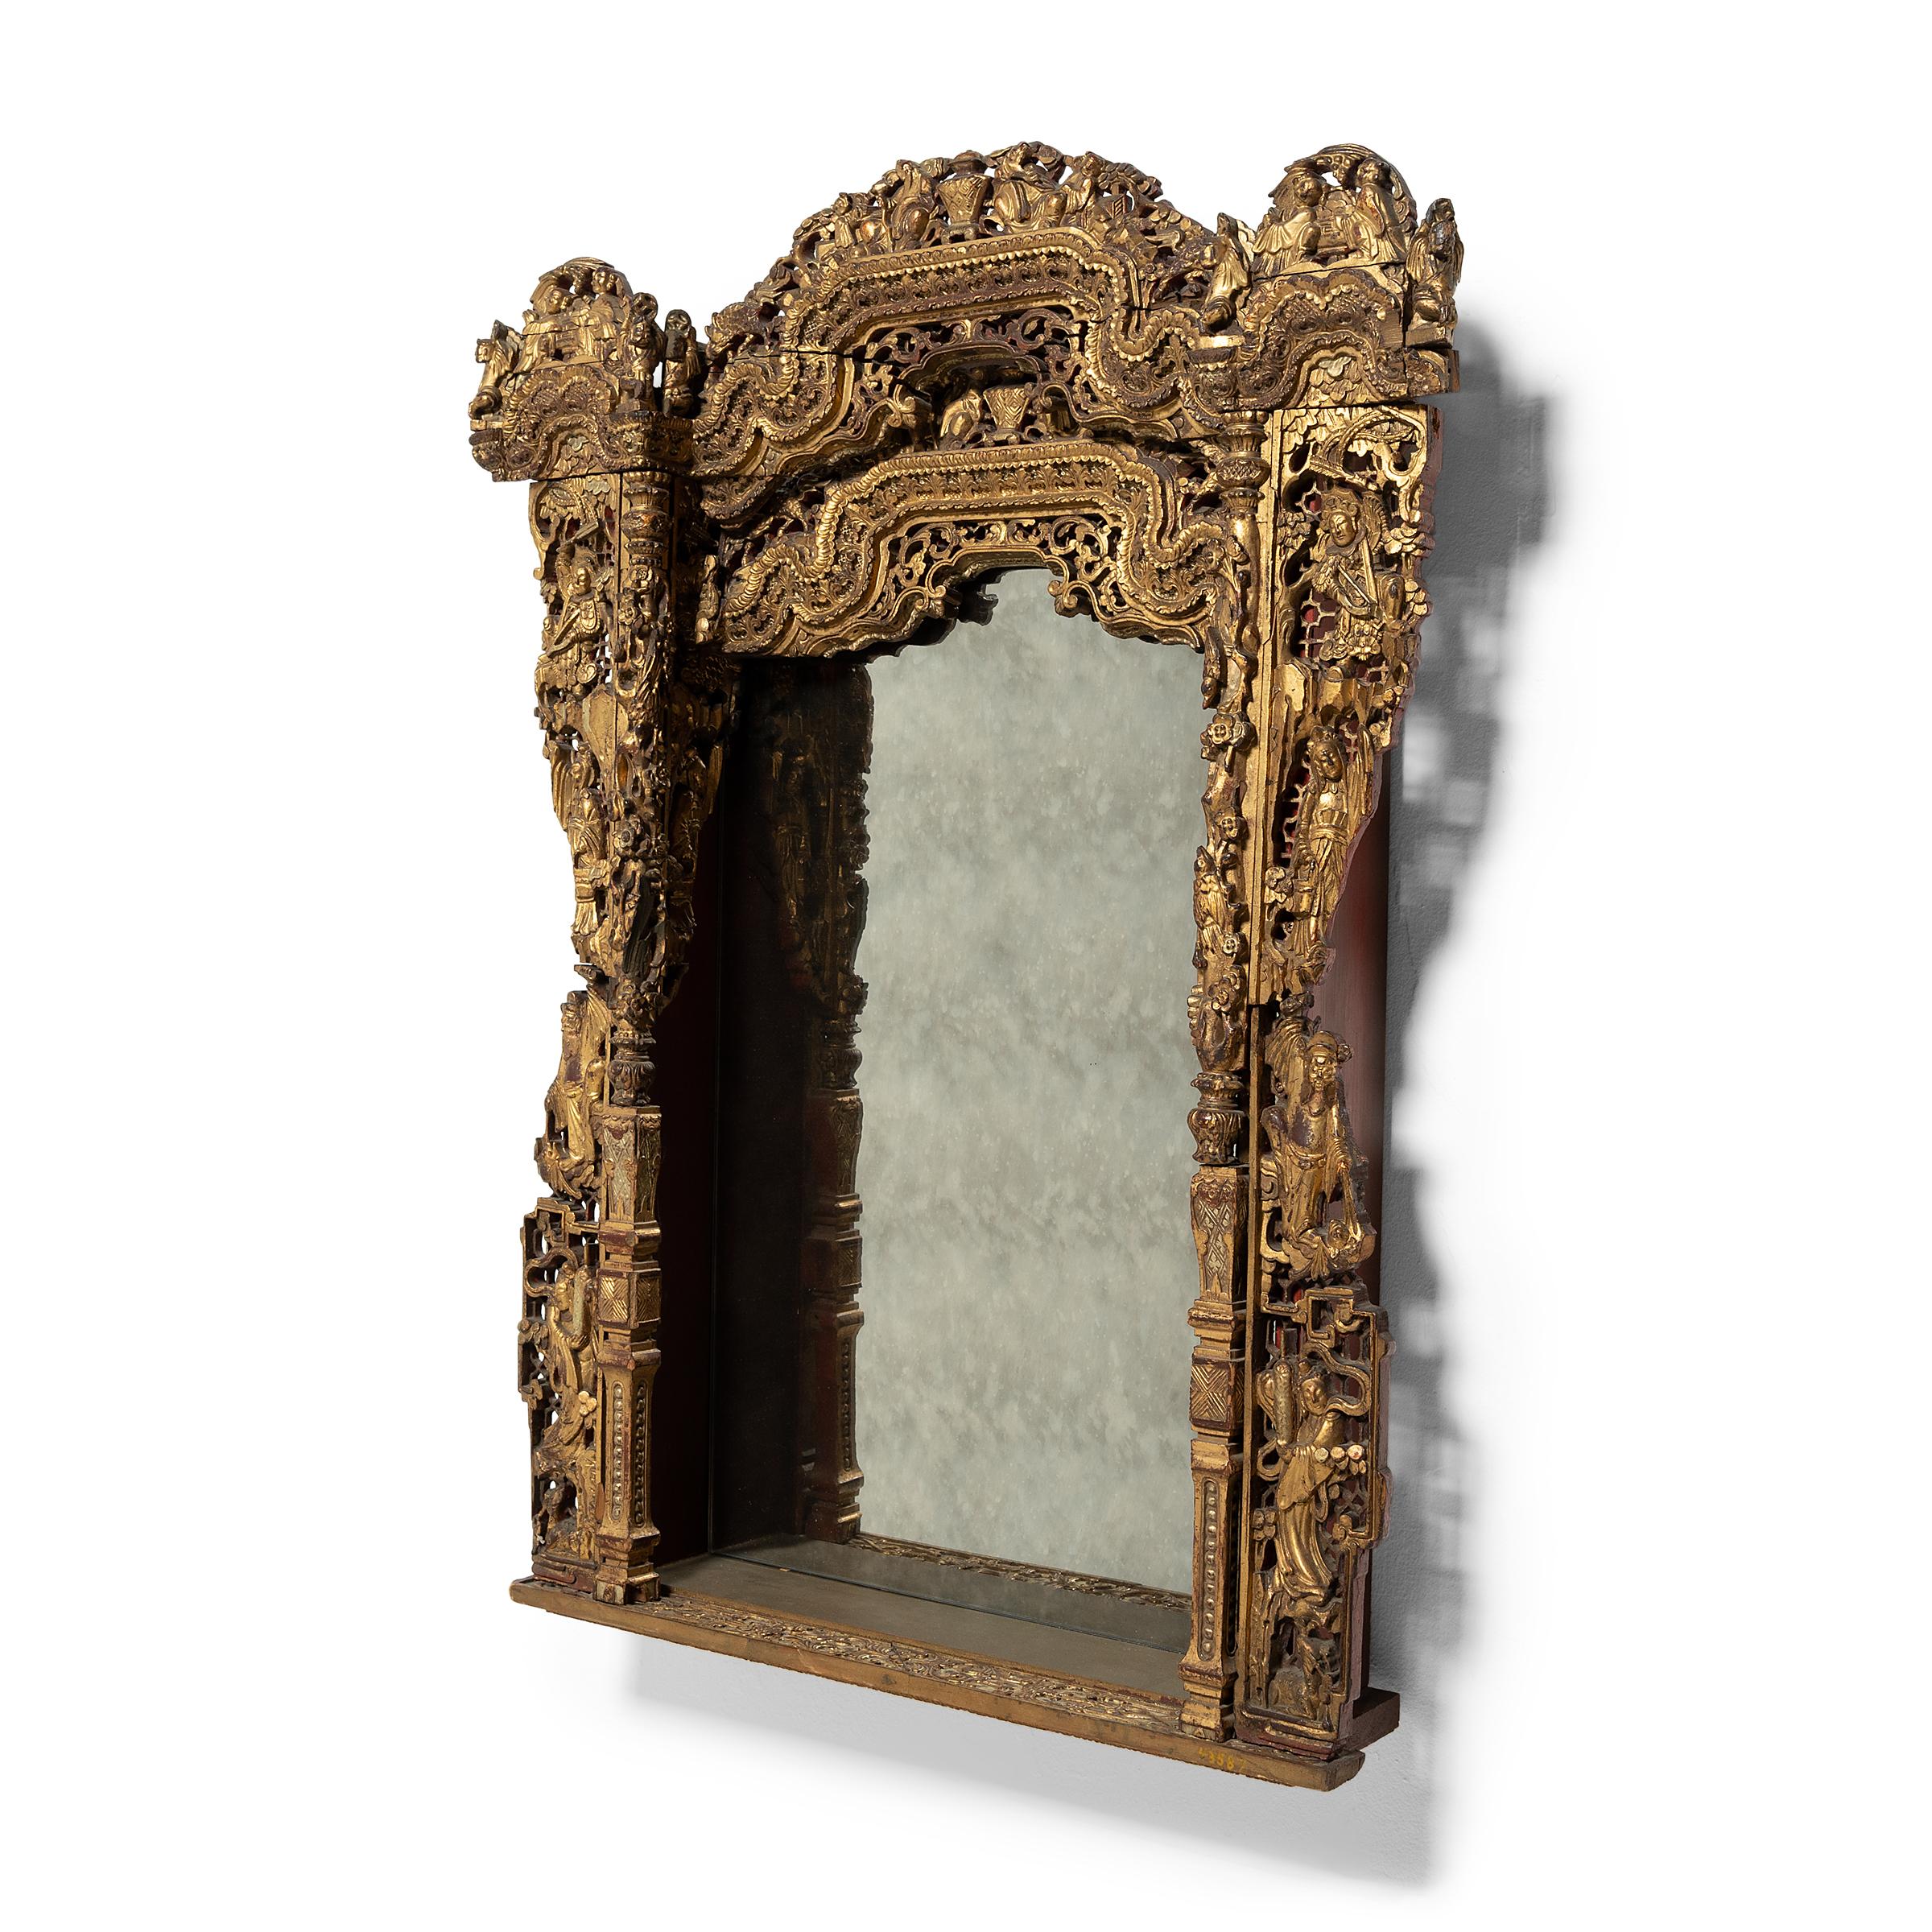 A dazzling display of intricate carvings and gilt lacquer, this fabulous wall mirror was originally an ornate shrine surround used to enclose a religious figure or shrine display. The elaborate frame is comprised of highly decorated wood panels,